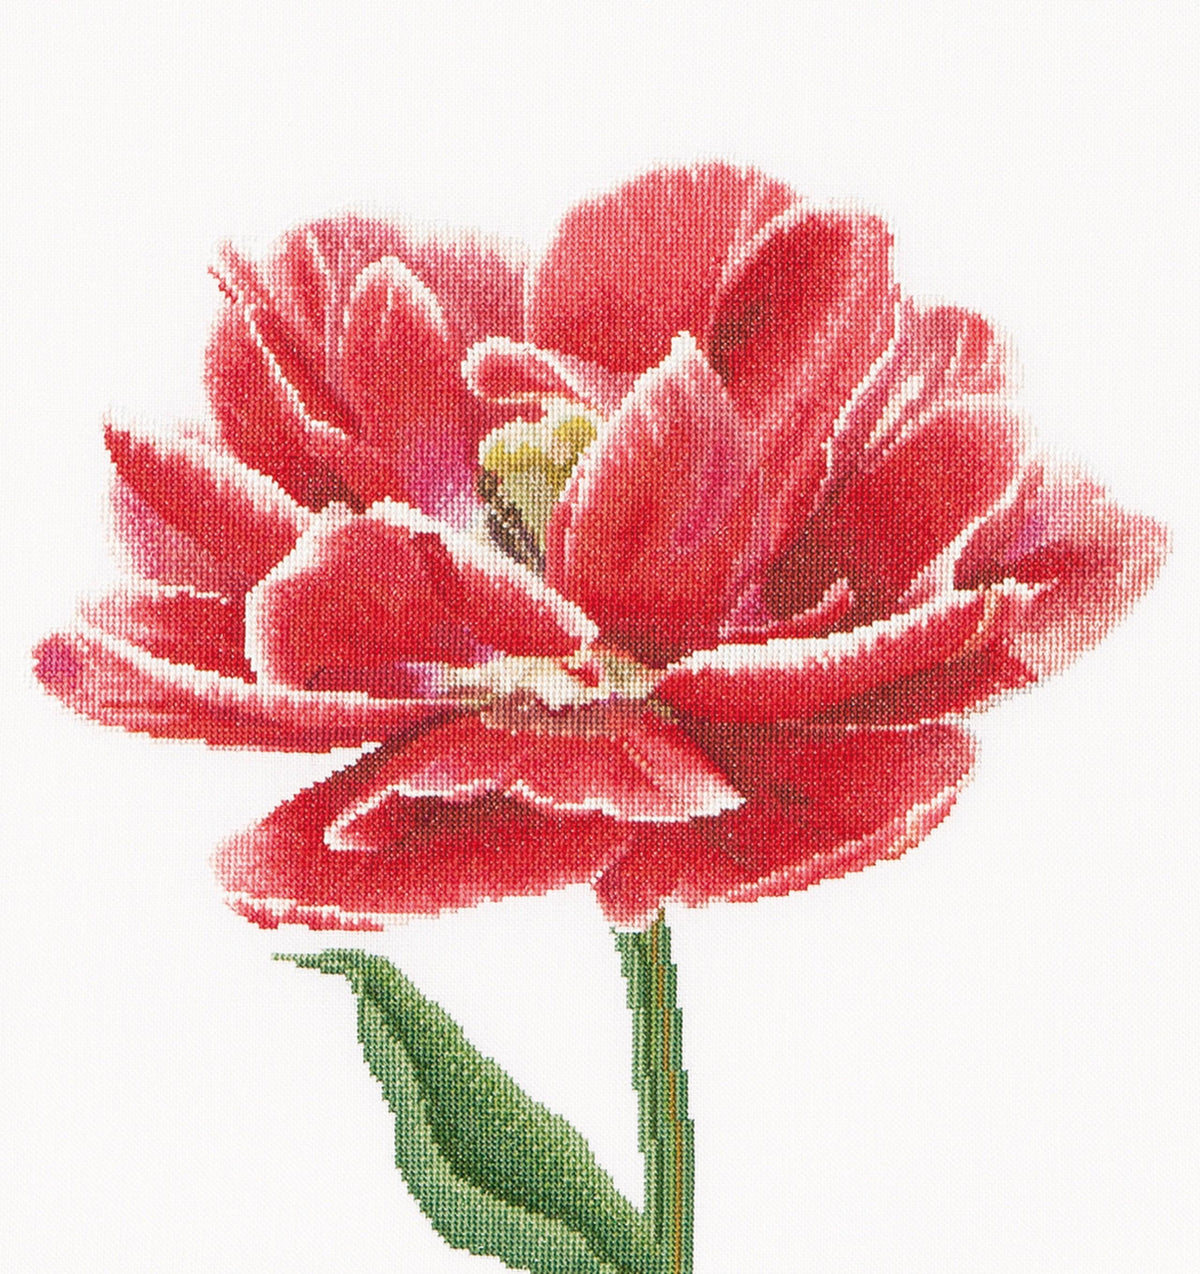 Thea Gouverneur - Counted Cross Stitch Kit - Red/White Edged Early Double Tulip - Aida - 16 count - 520A - Thea Gouverneur Since 1959